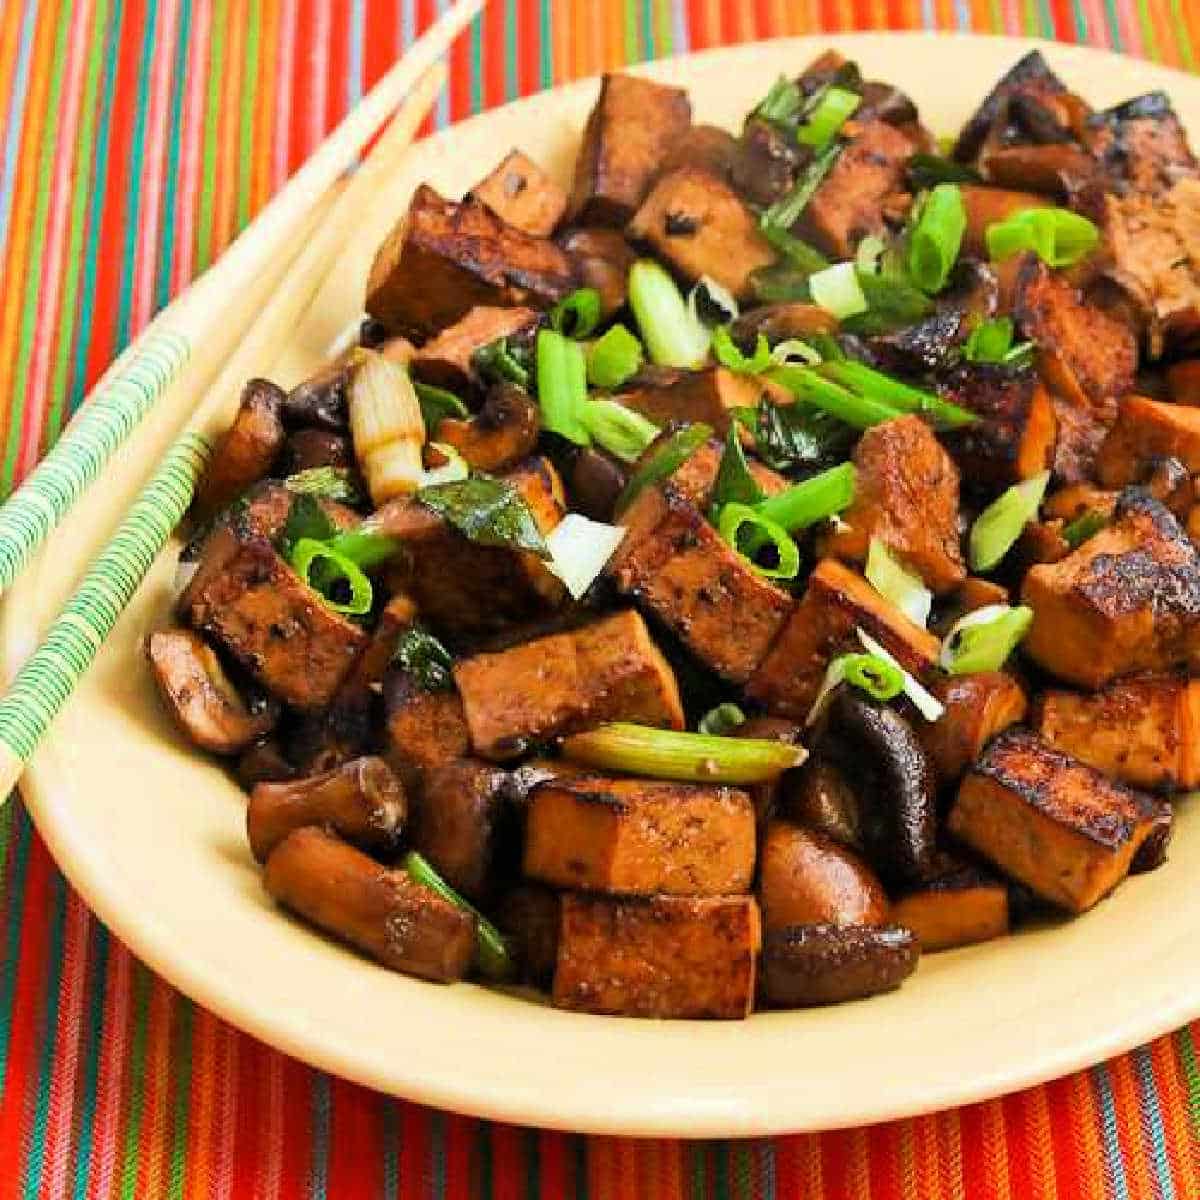 Square image of Stir-Fried Marinated Tofu with Mushrooms shown on serving plate with chopsticks.